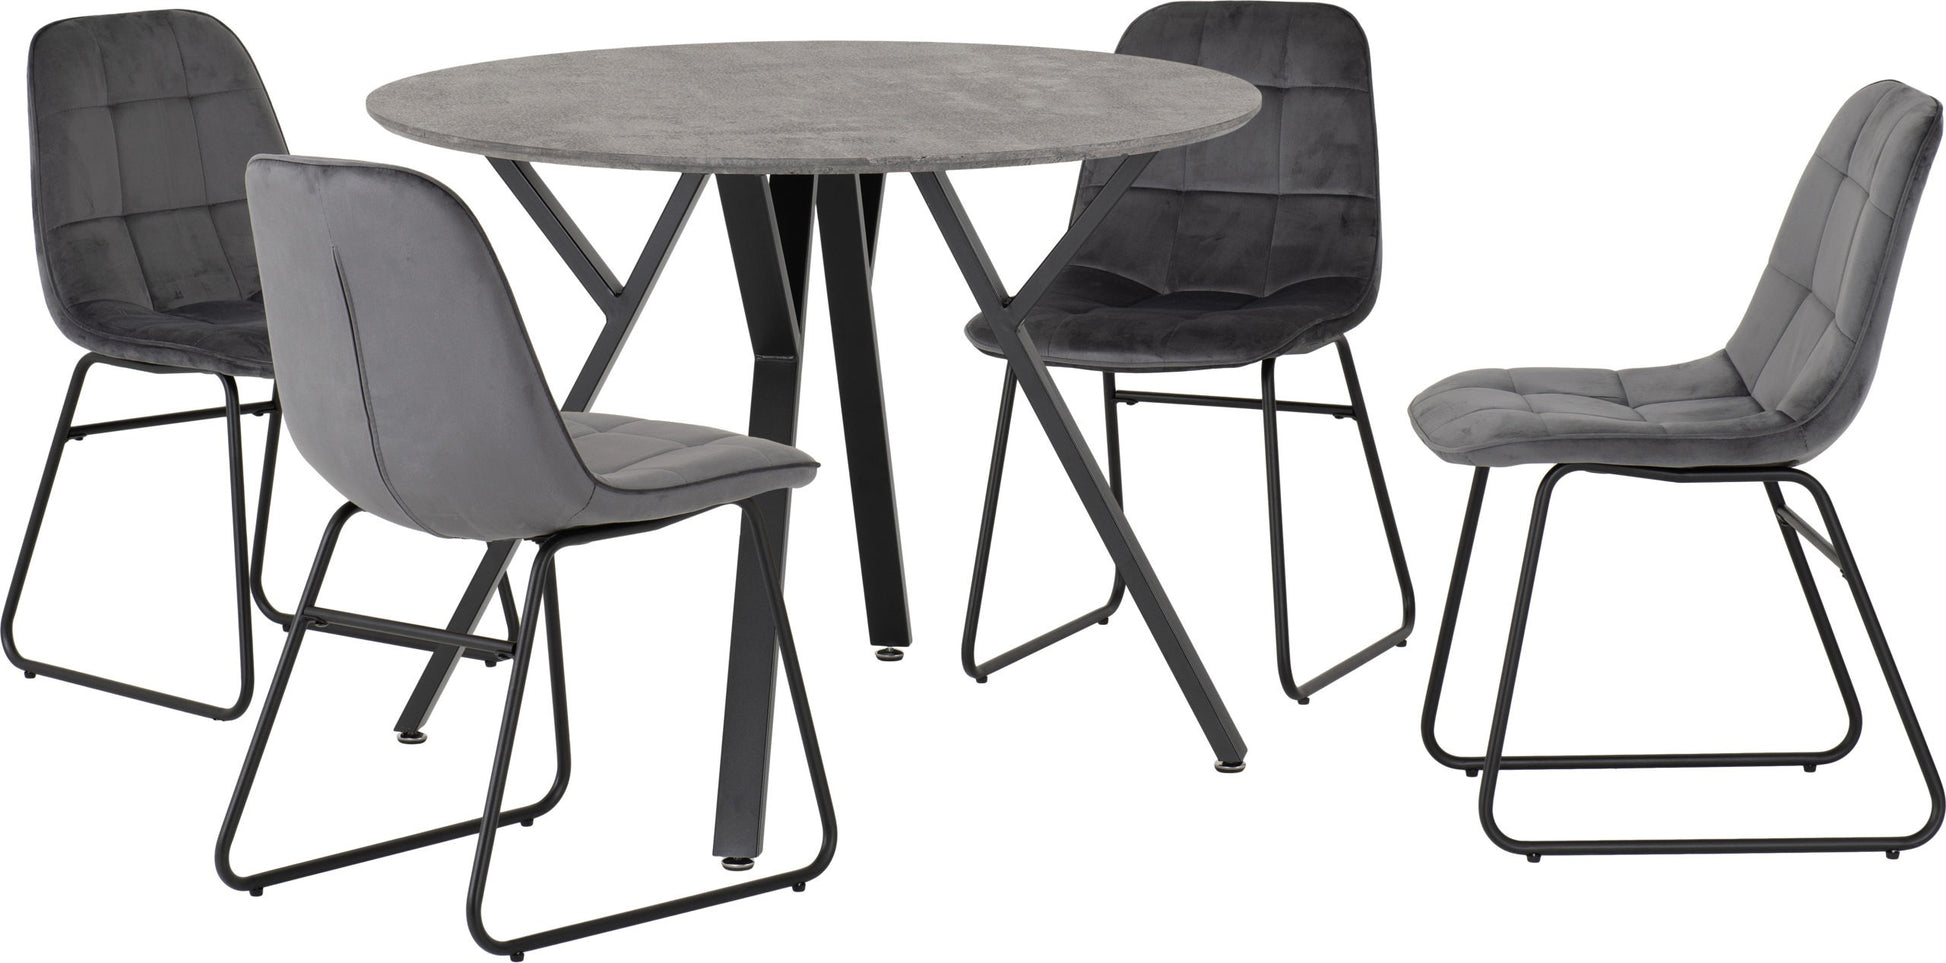 Athens Round Dining Set with Lukas Chairs - Concrete Effect/Black/Grey Velvet